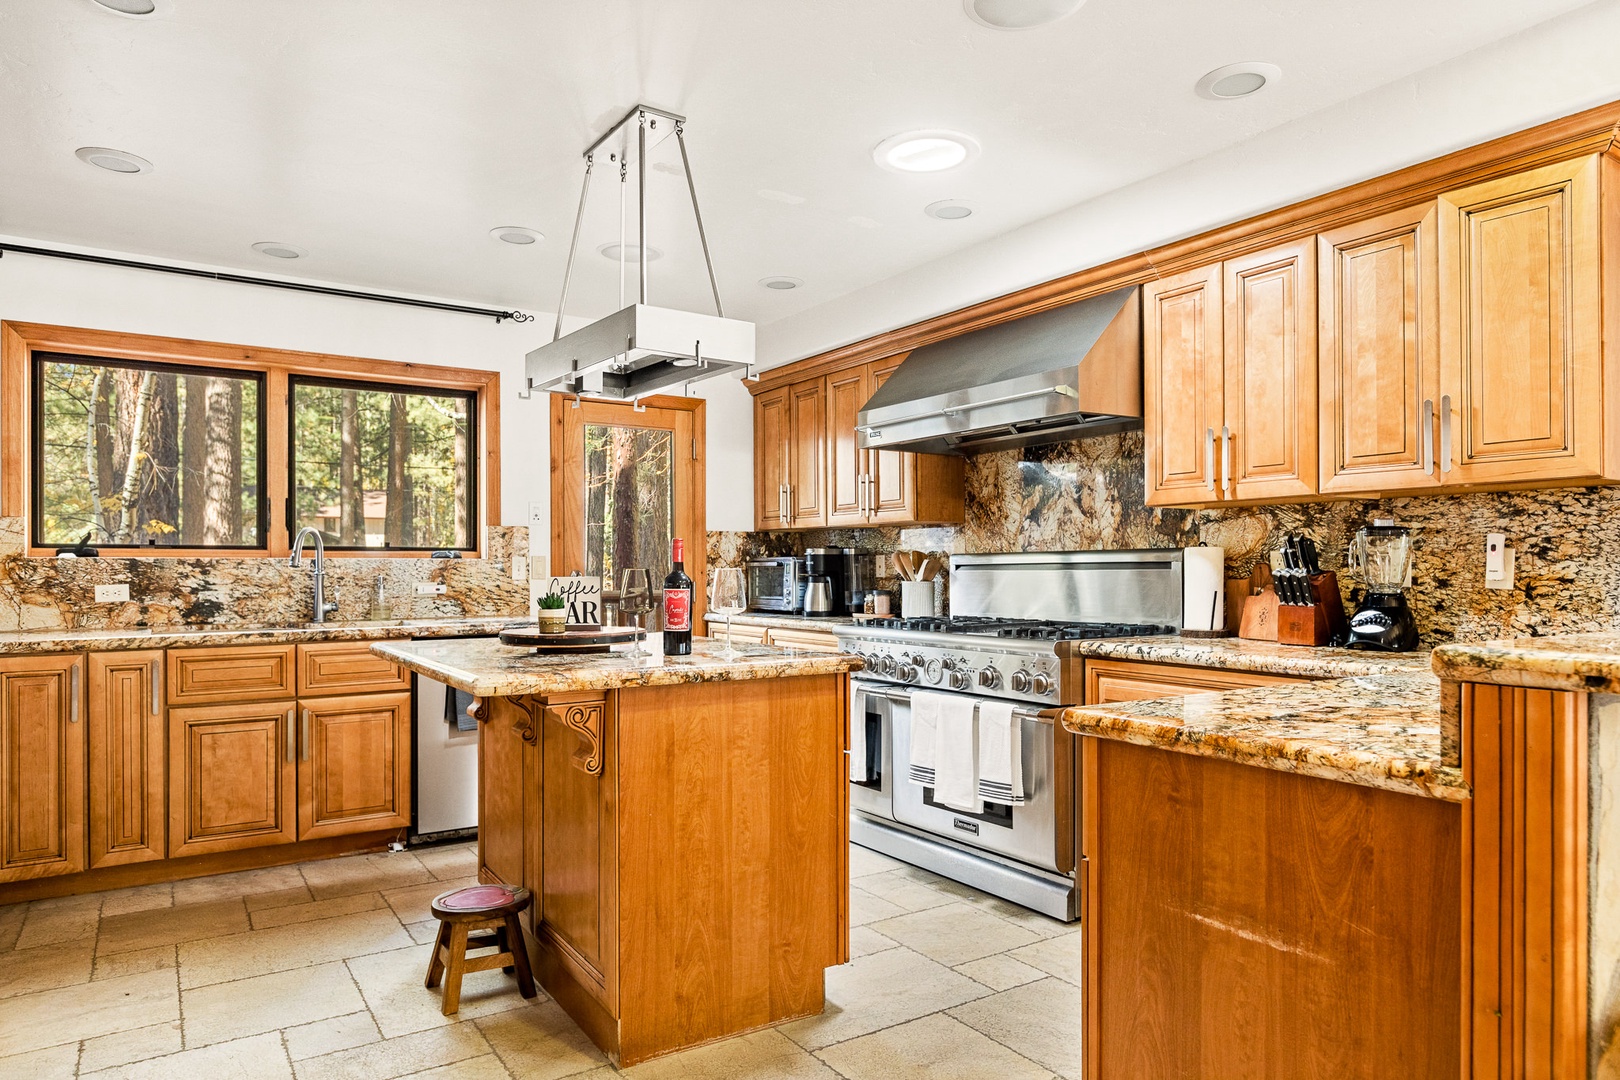 Spacious kitchen with large range grill, and stainless steel appliances